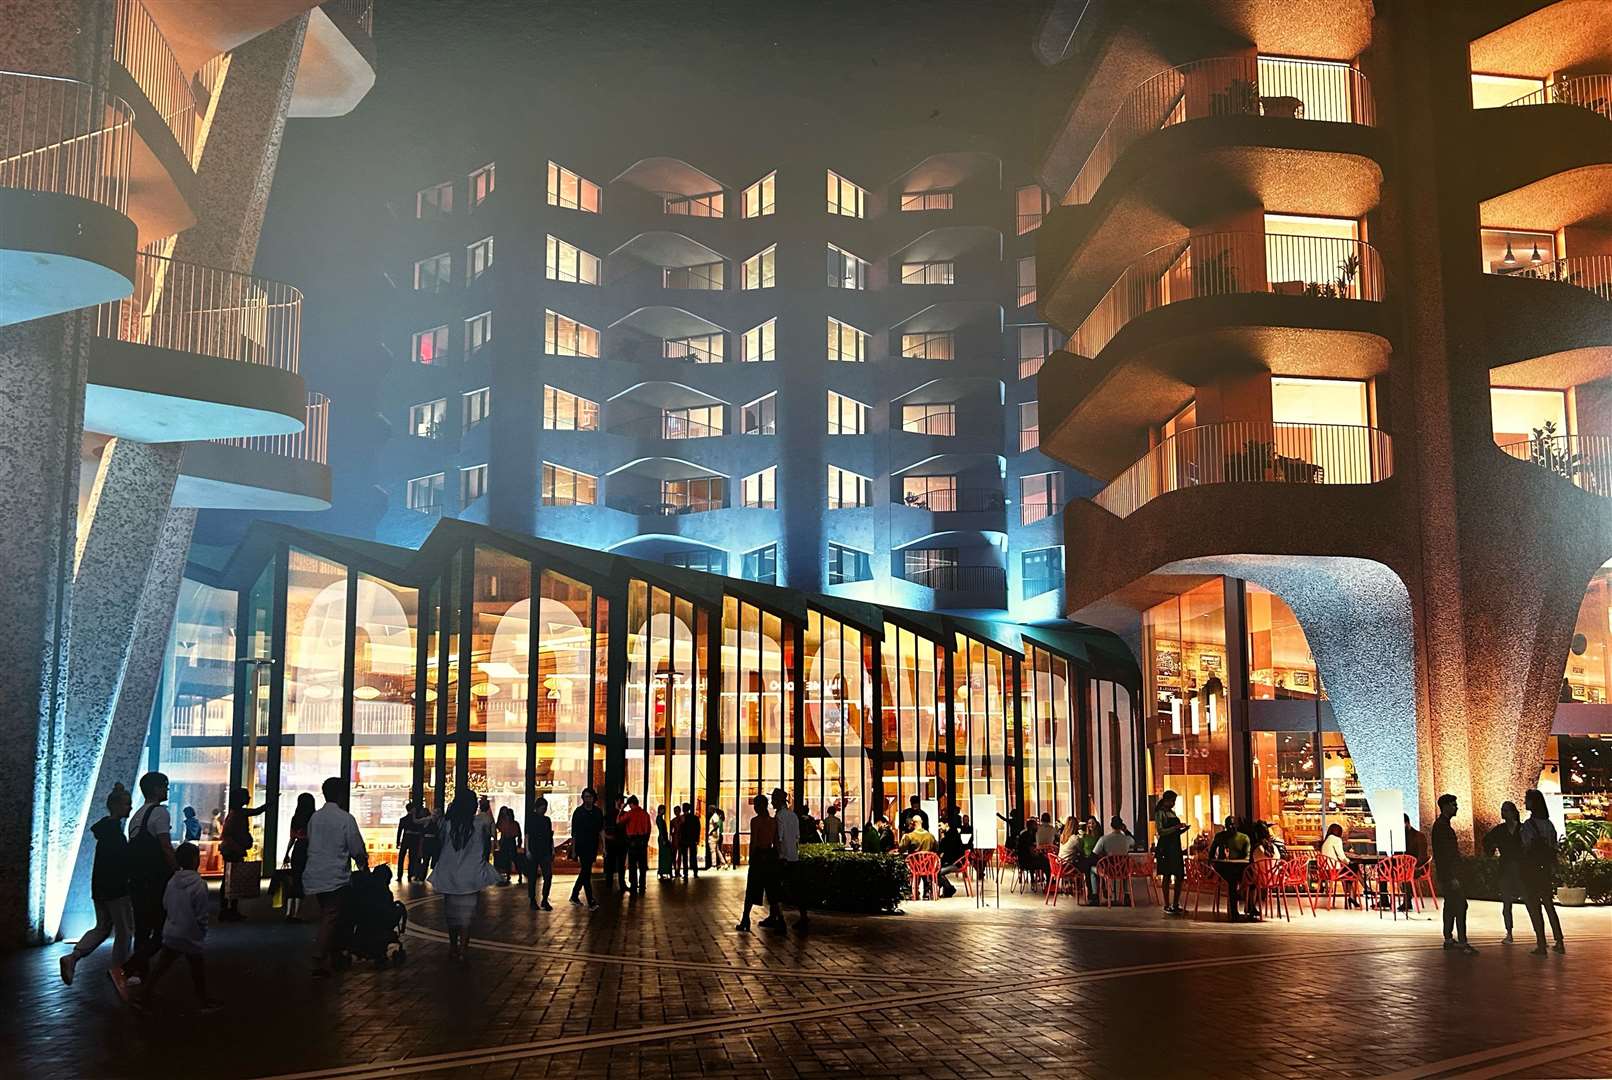 How the redeveloped harbour area in Folkestone could look at night